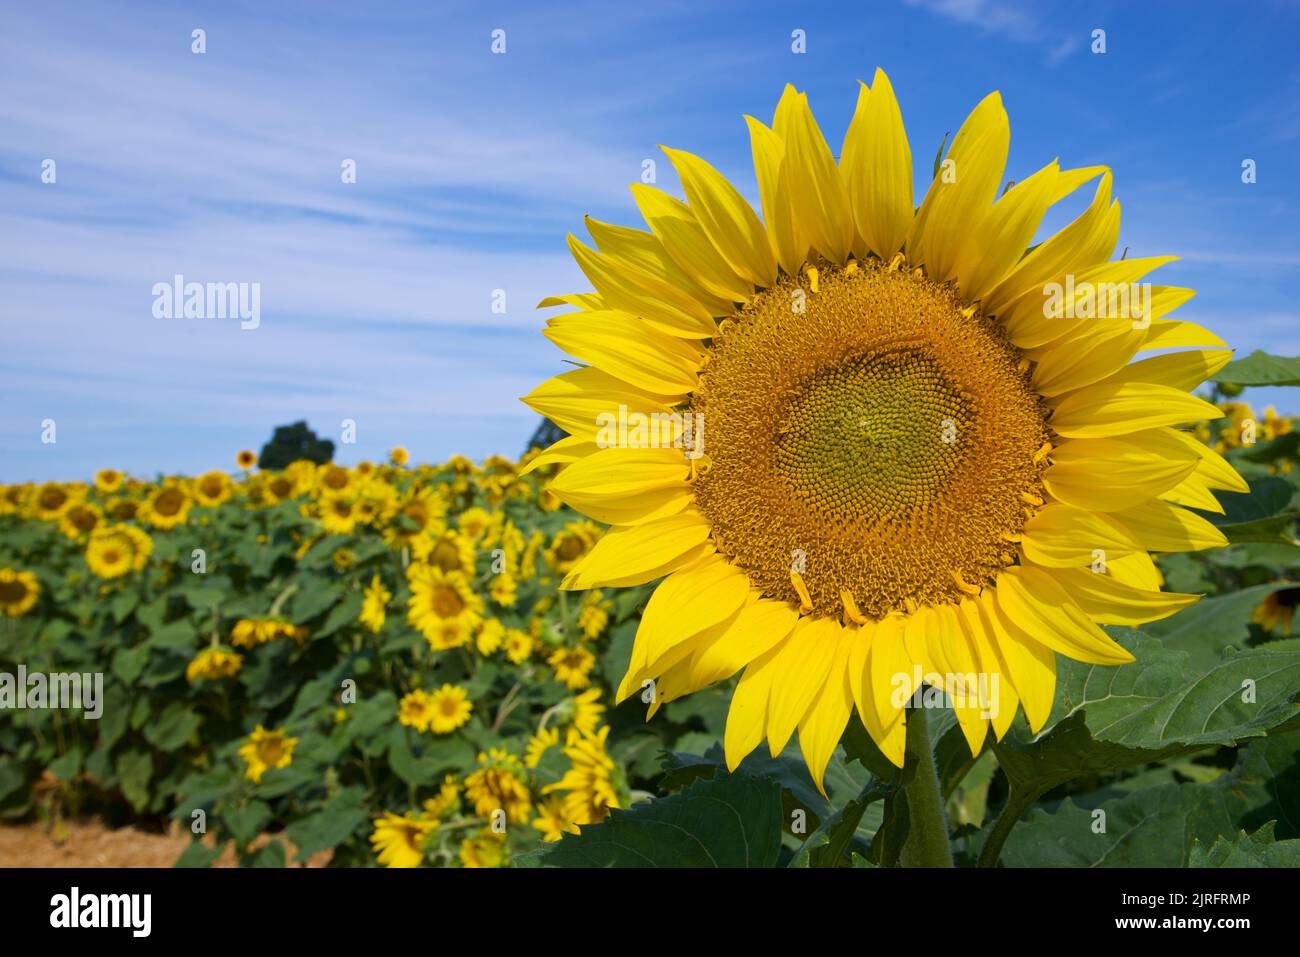 Close-up of a single sunflower in the sunflower field Stock Photo